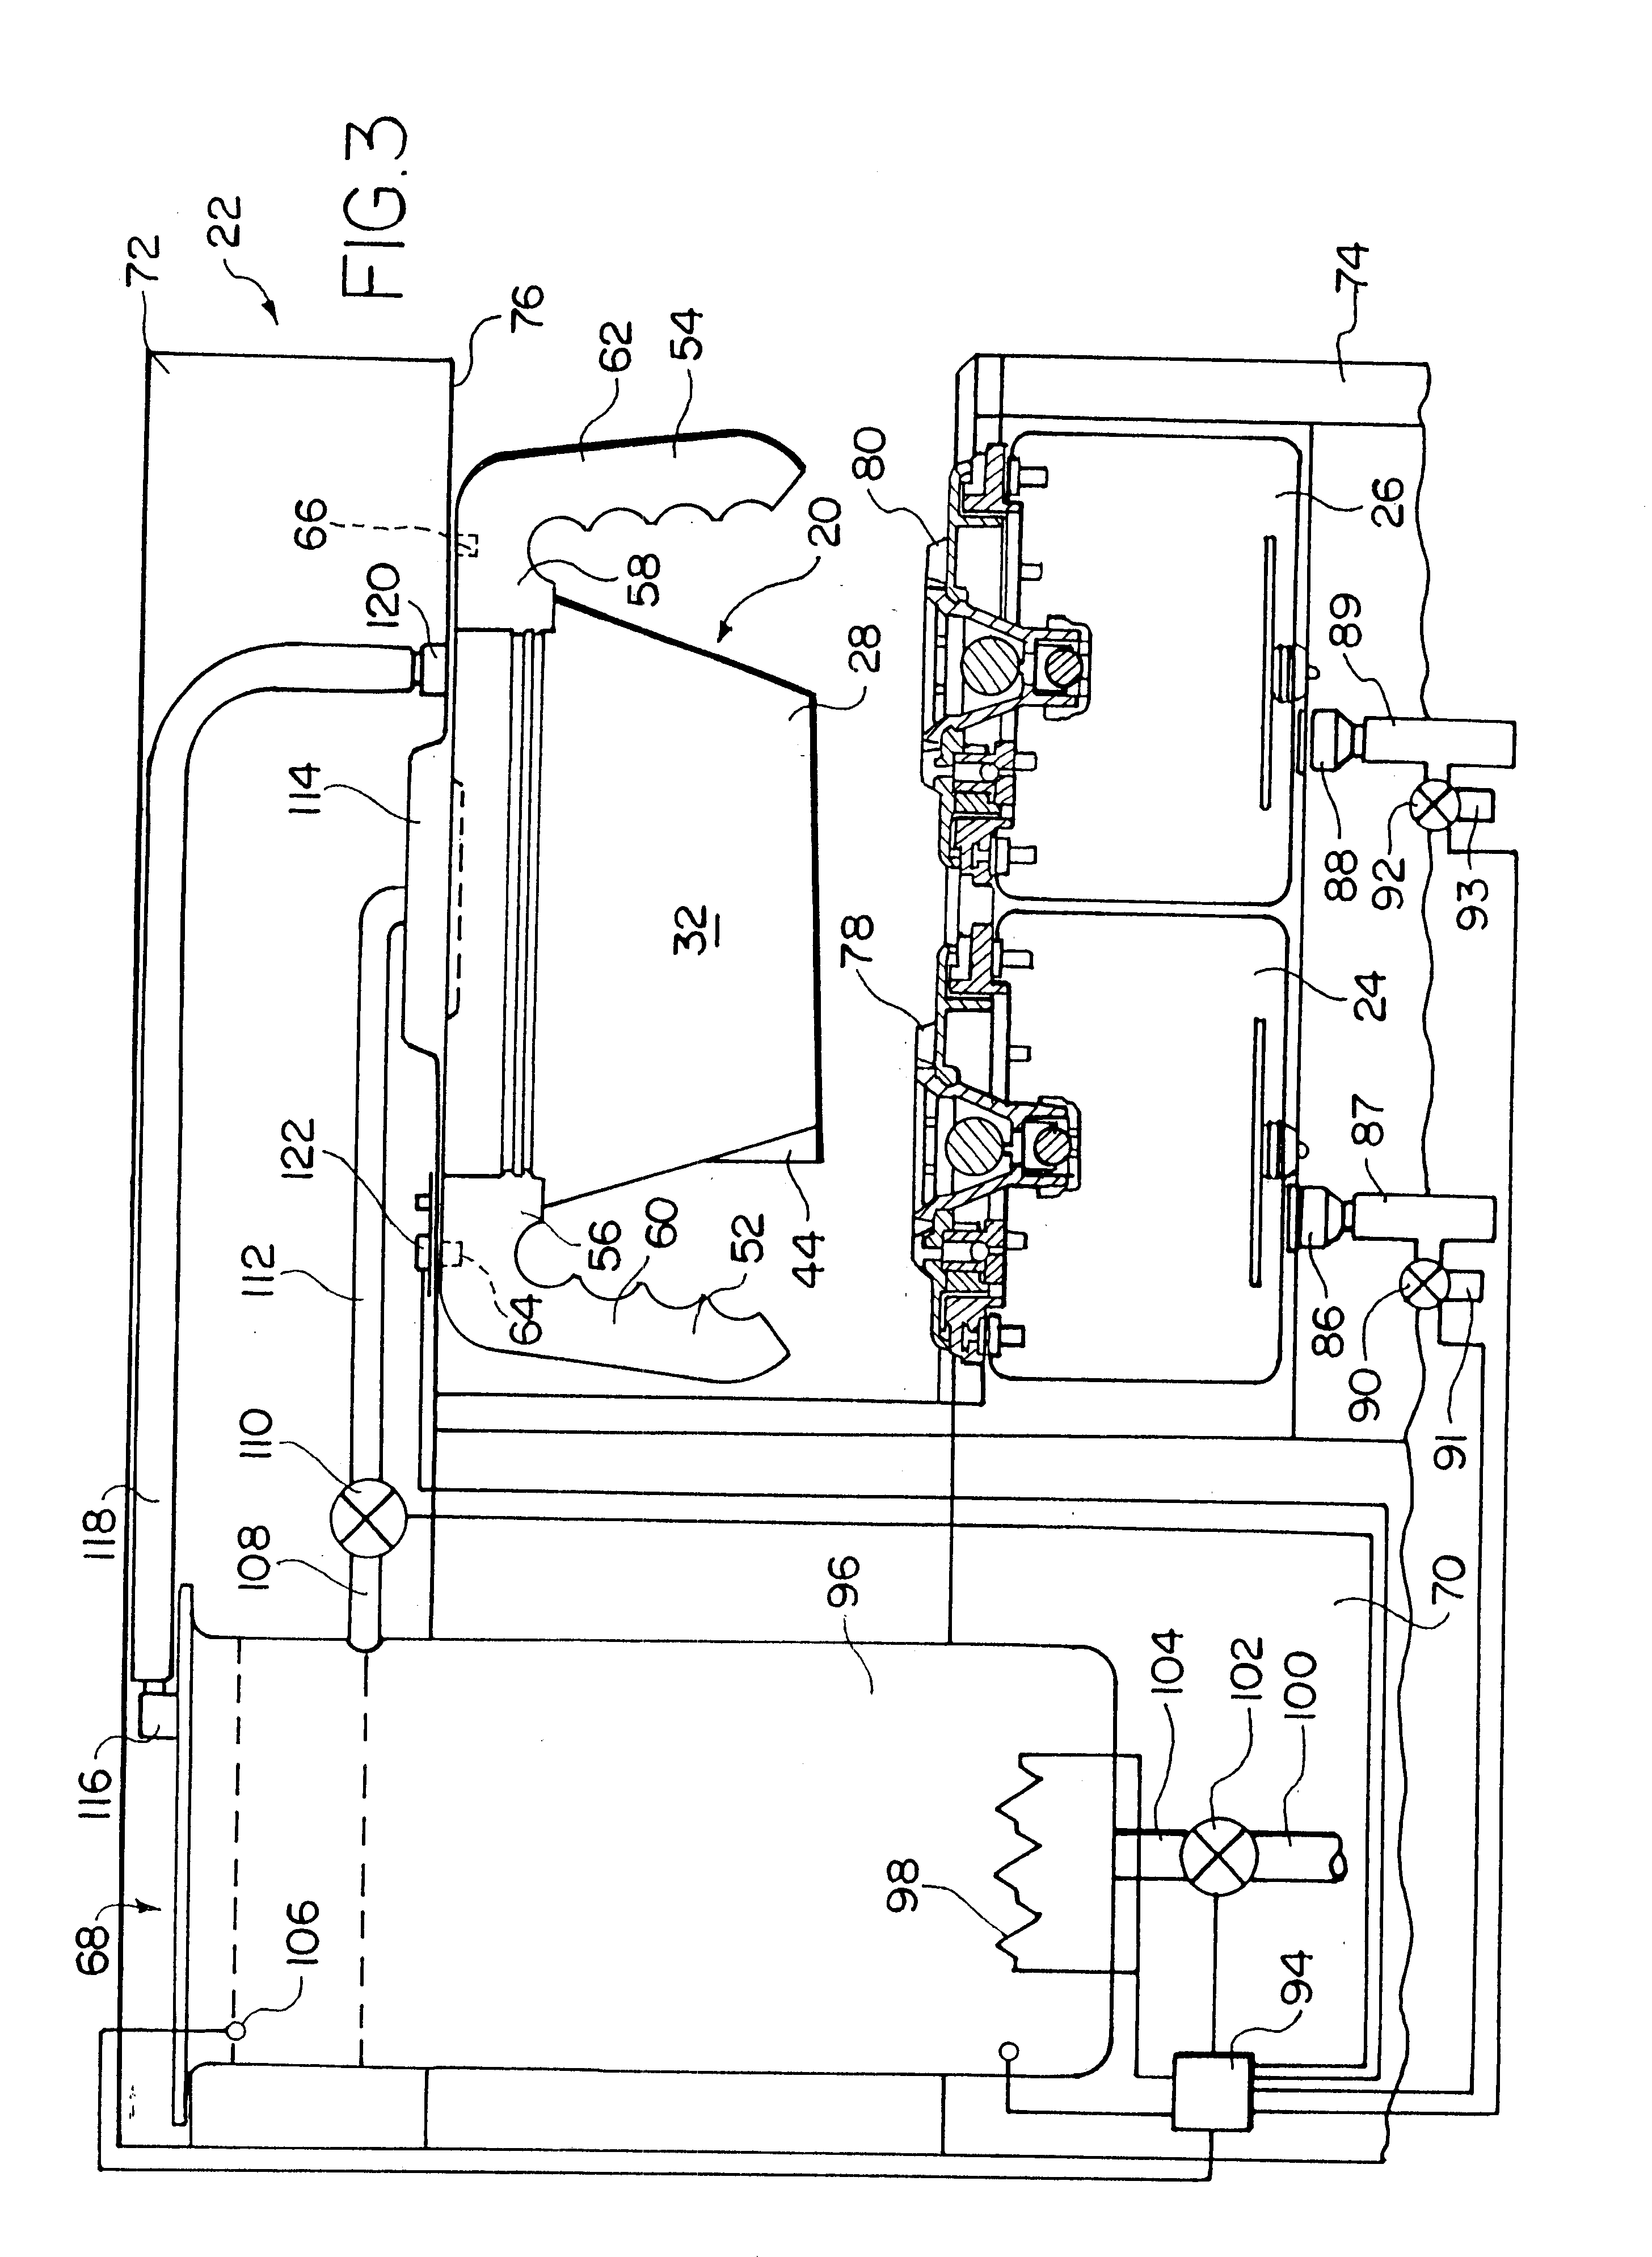 Multiple direction holder and beverage making apparatus